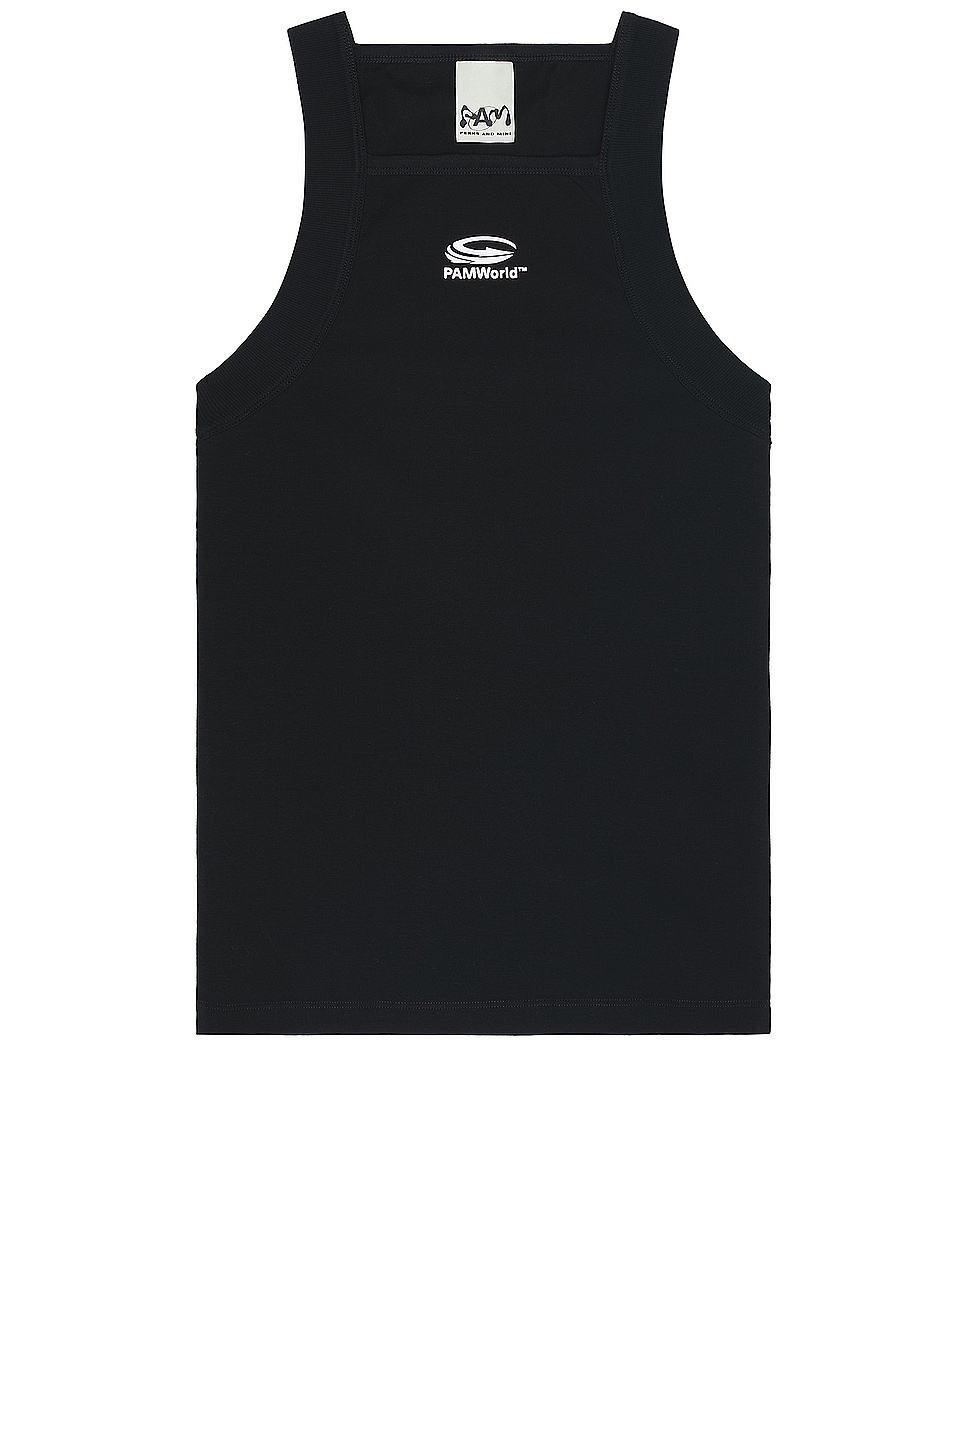 Image 1 of P.A.M. Perks and Mini Square Tank Top in Black